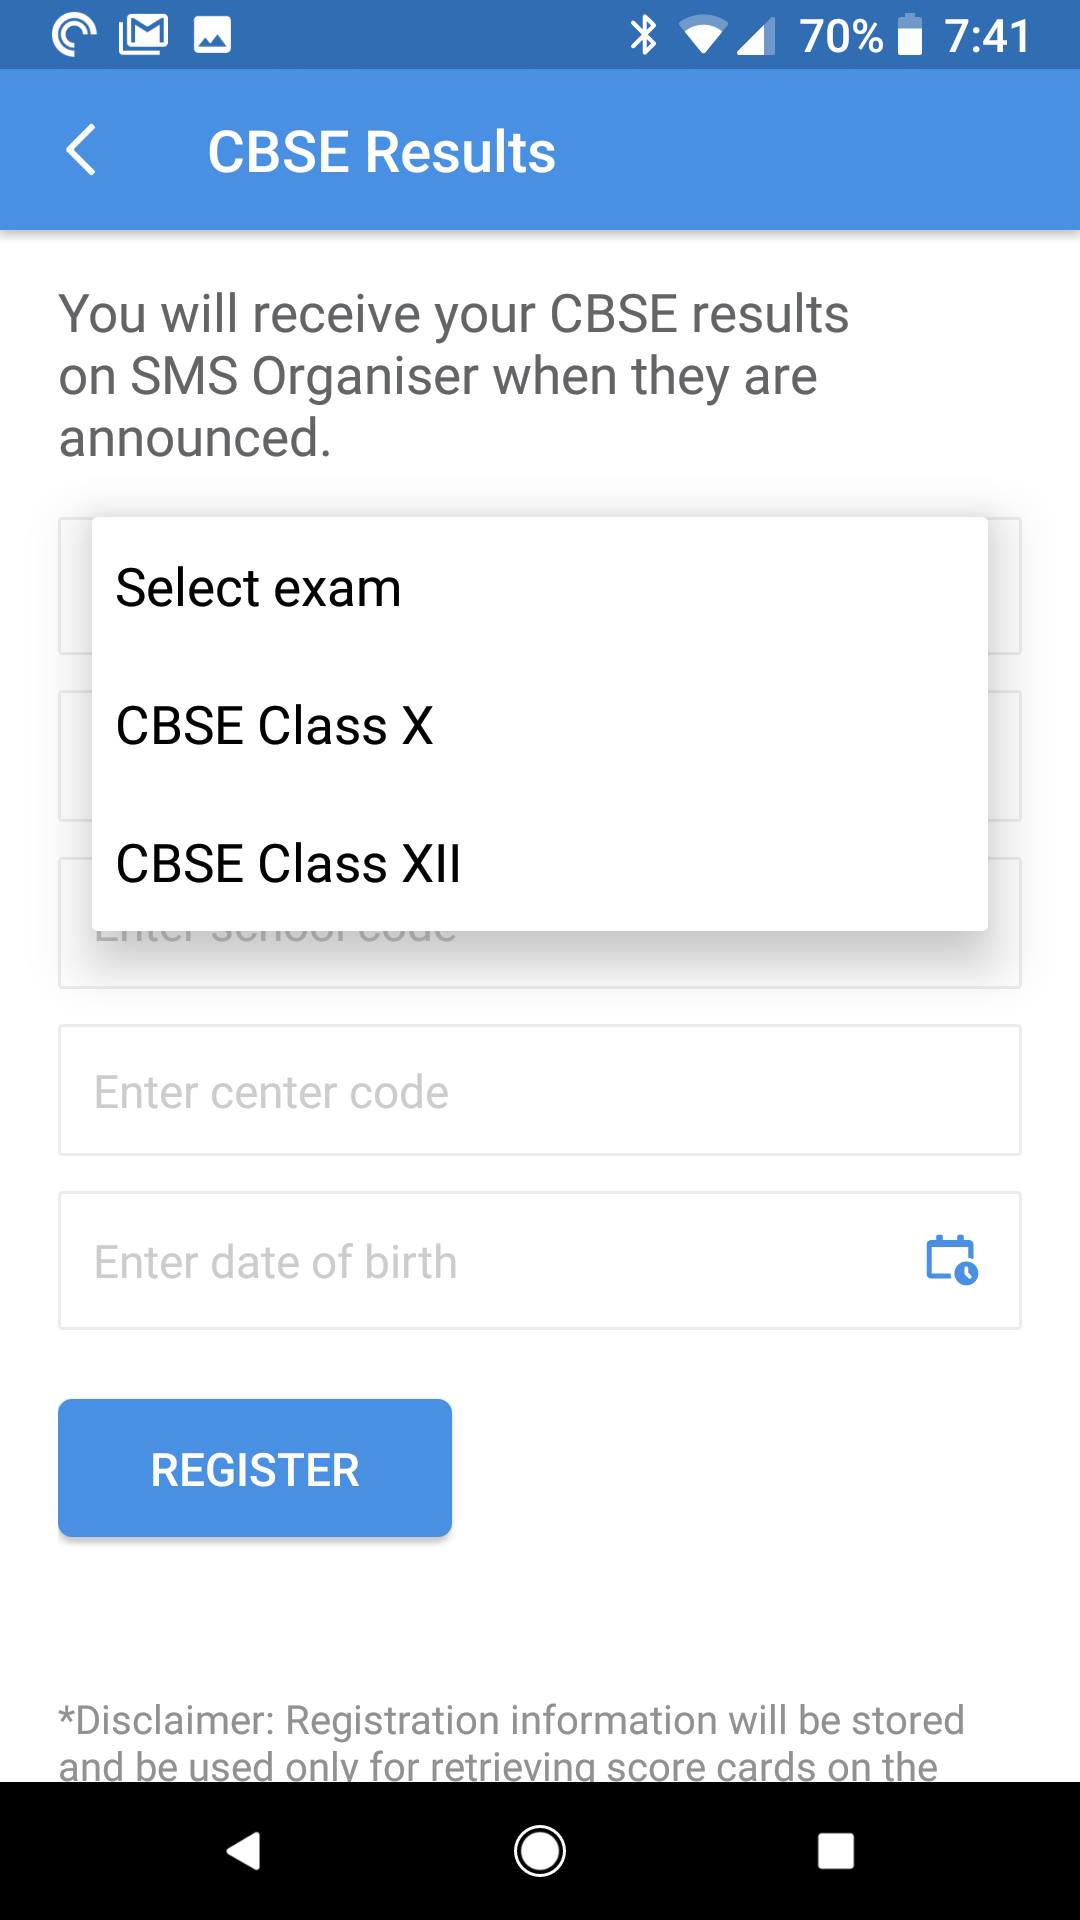 CBSE results showing in Microsoft SMS Organizer App